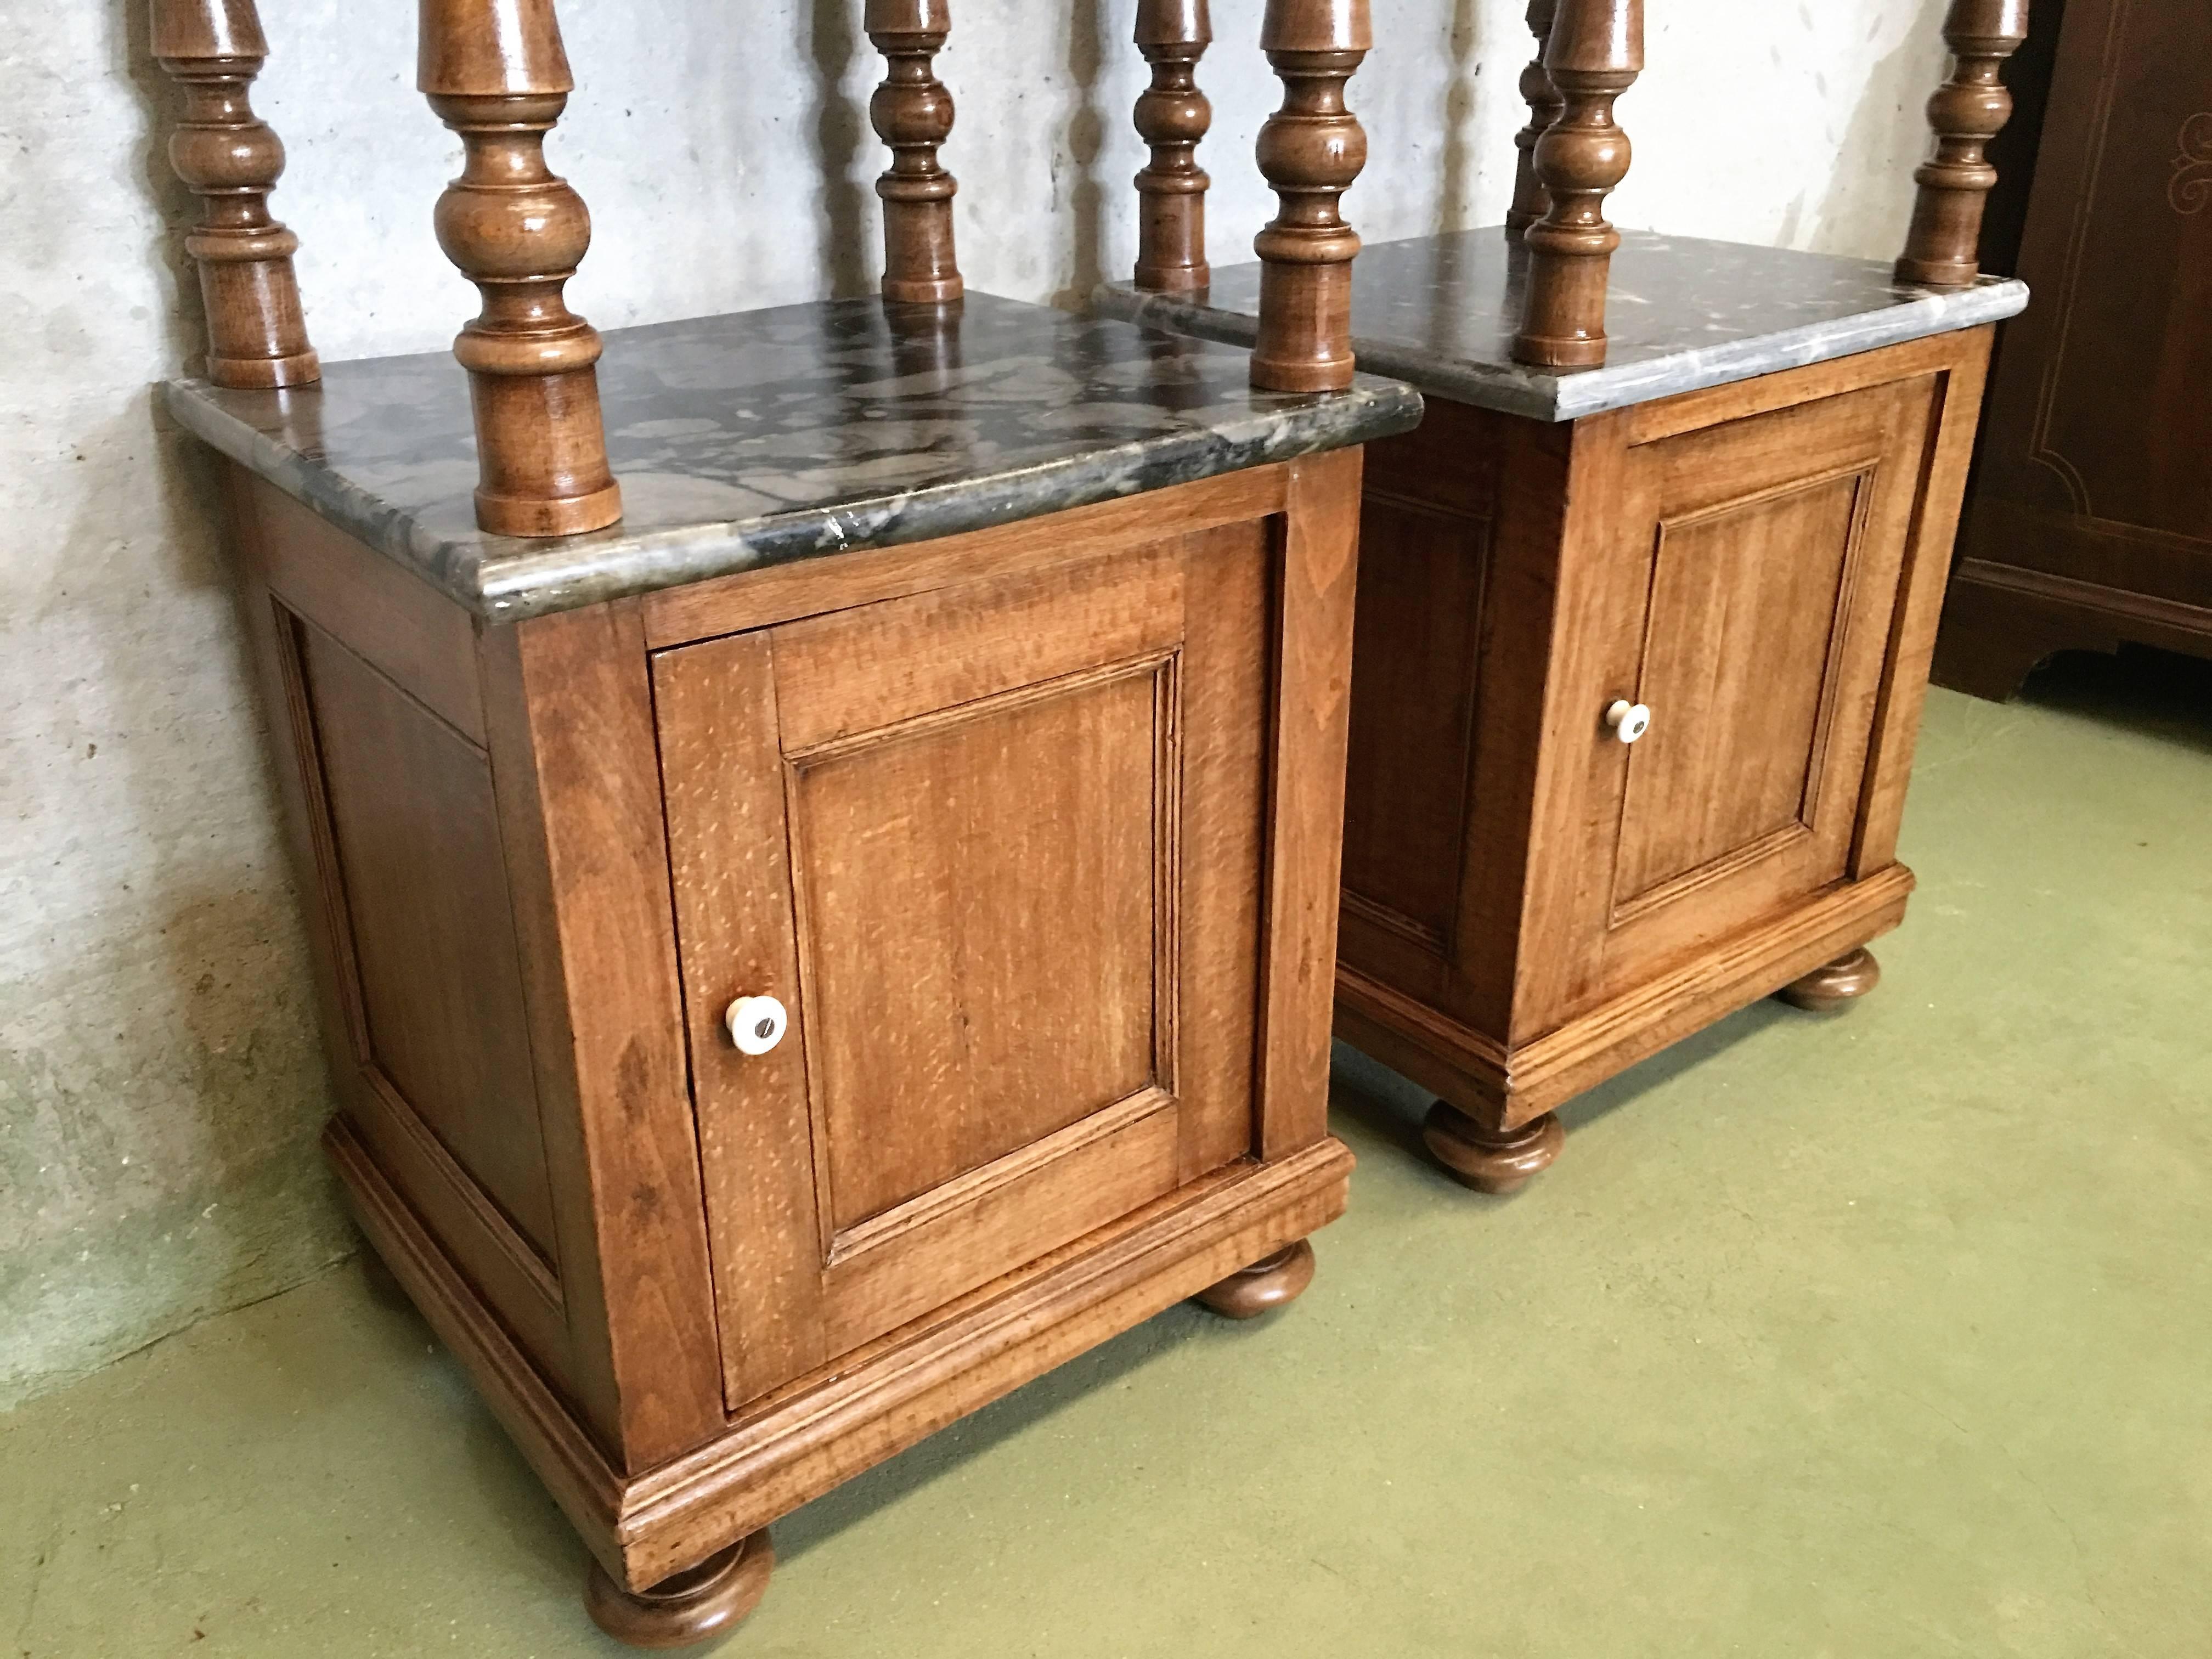 19th Century Antique, Tall and High Top Solid Oak Bedside Cabinets with Marble Top and Drawer